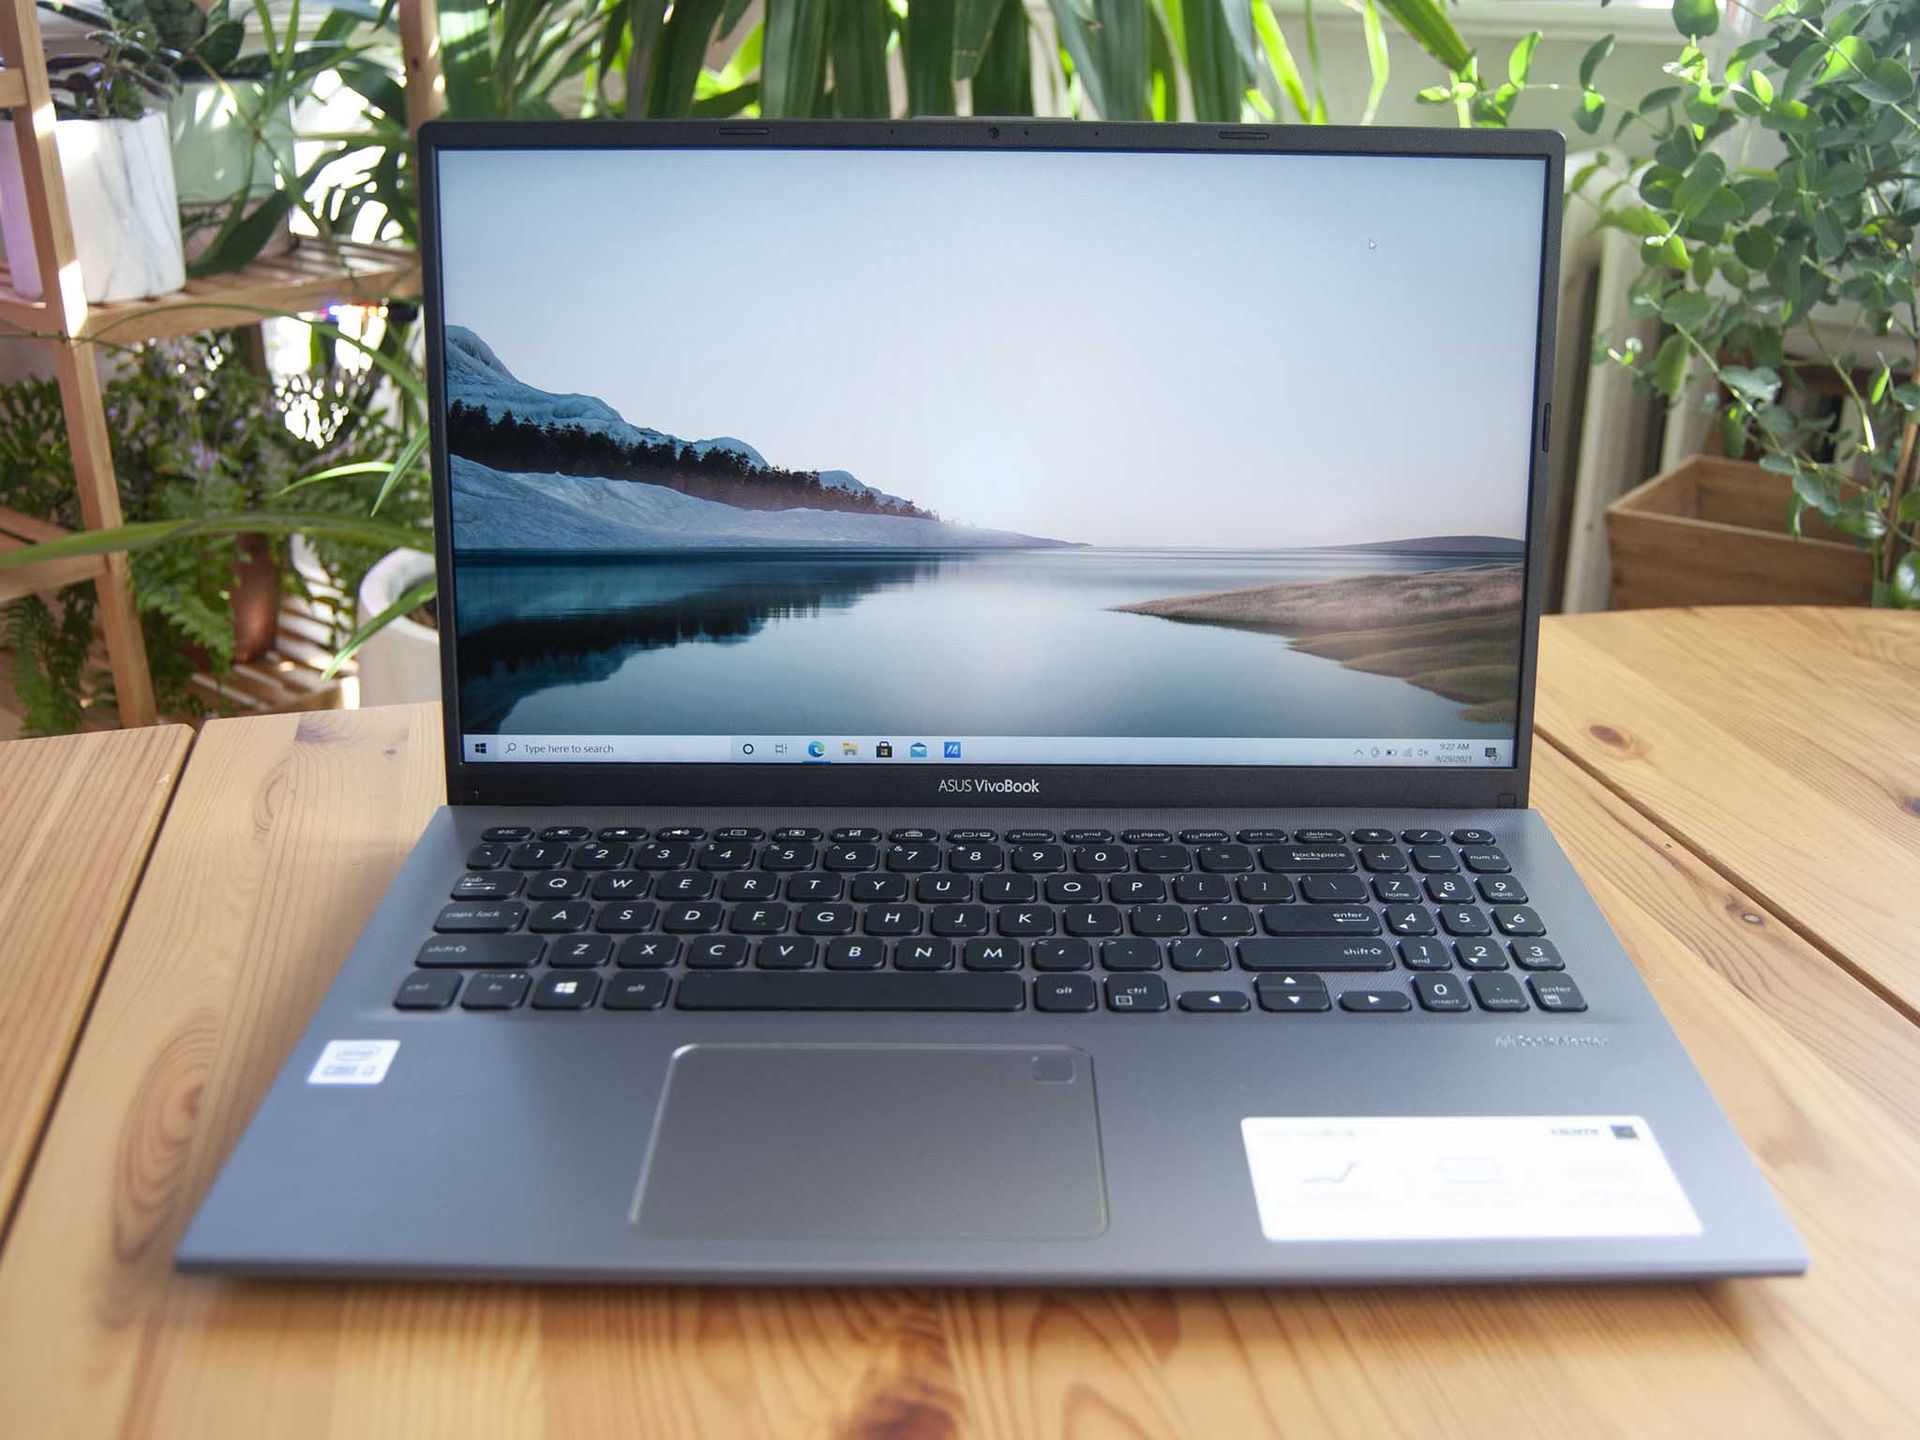 ASUS VivoBook 15 review One of the best sub500 laptops available